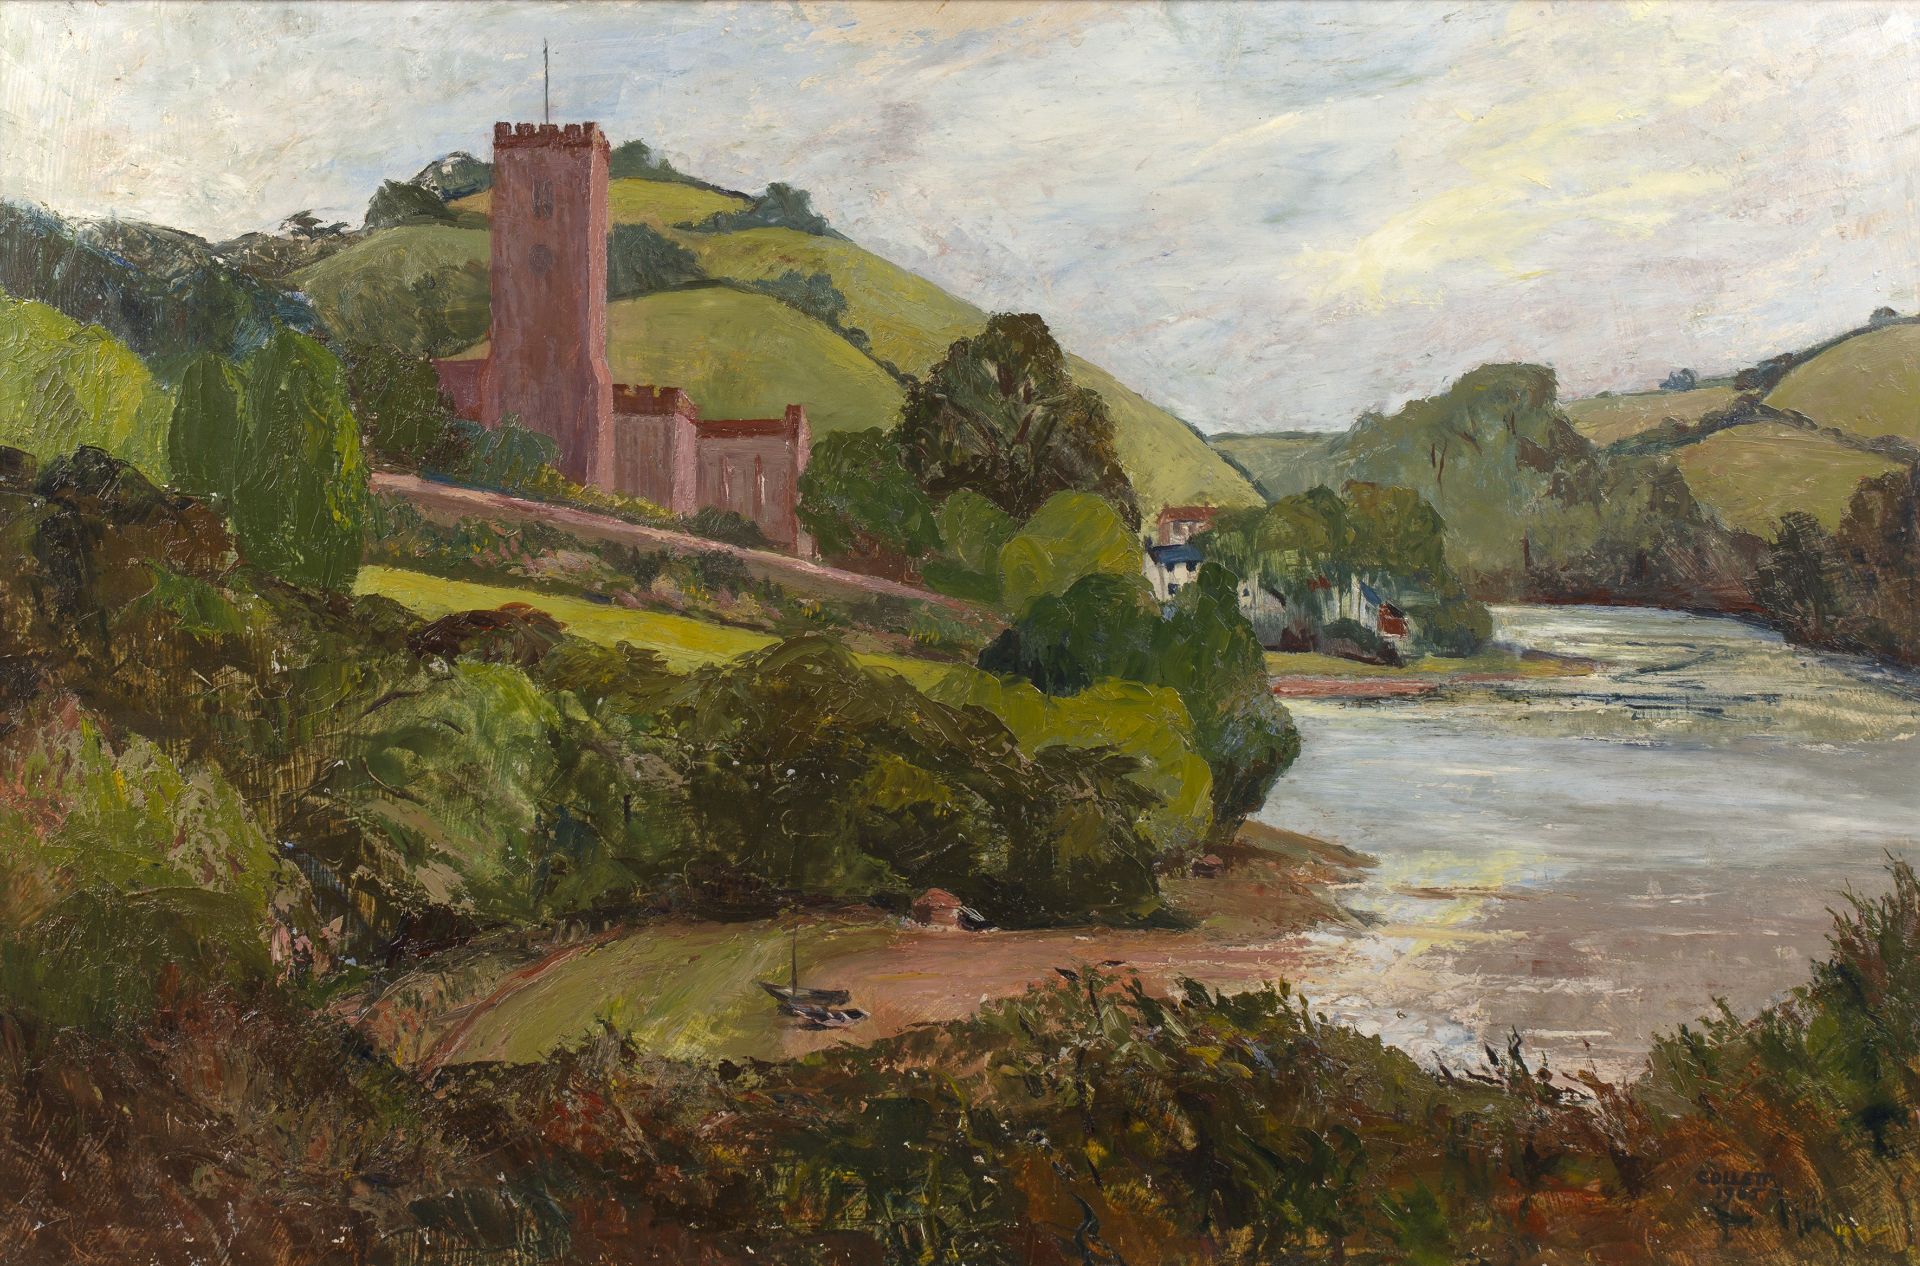 Olive Collett (20th Century School) 'View in Devon', oil on panel, signed and dated 1965 lower